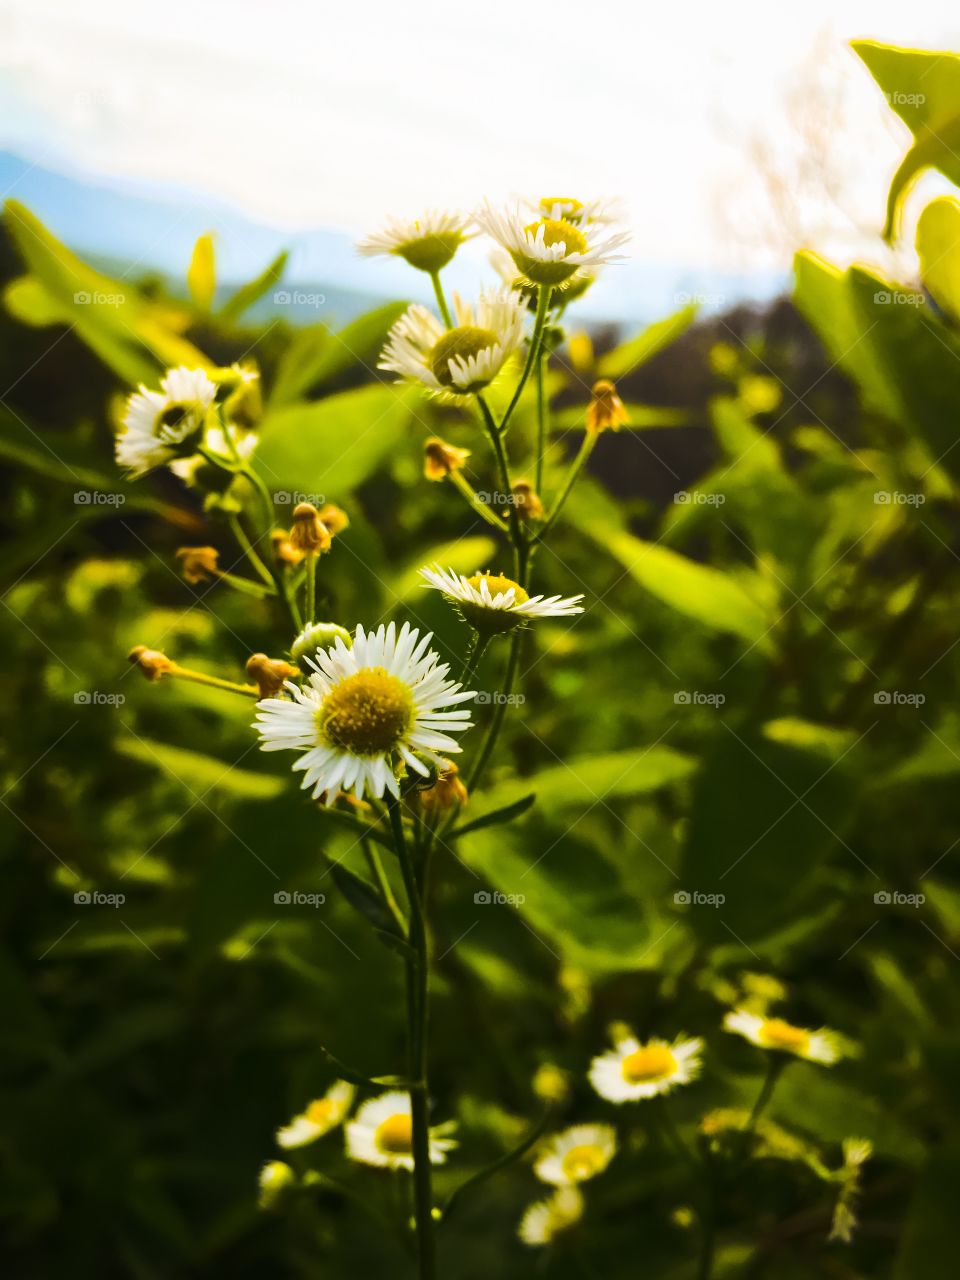 Anything can make a unique photograph, including small little flowers hidden in a bushel of weeds. 